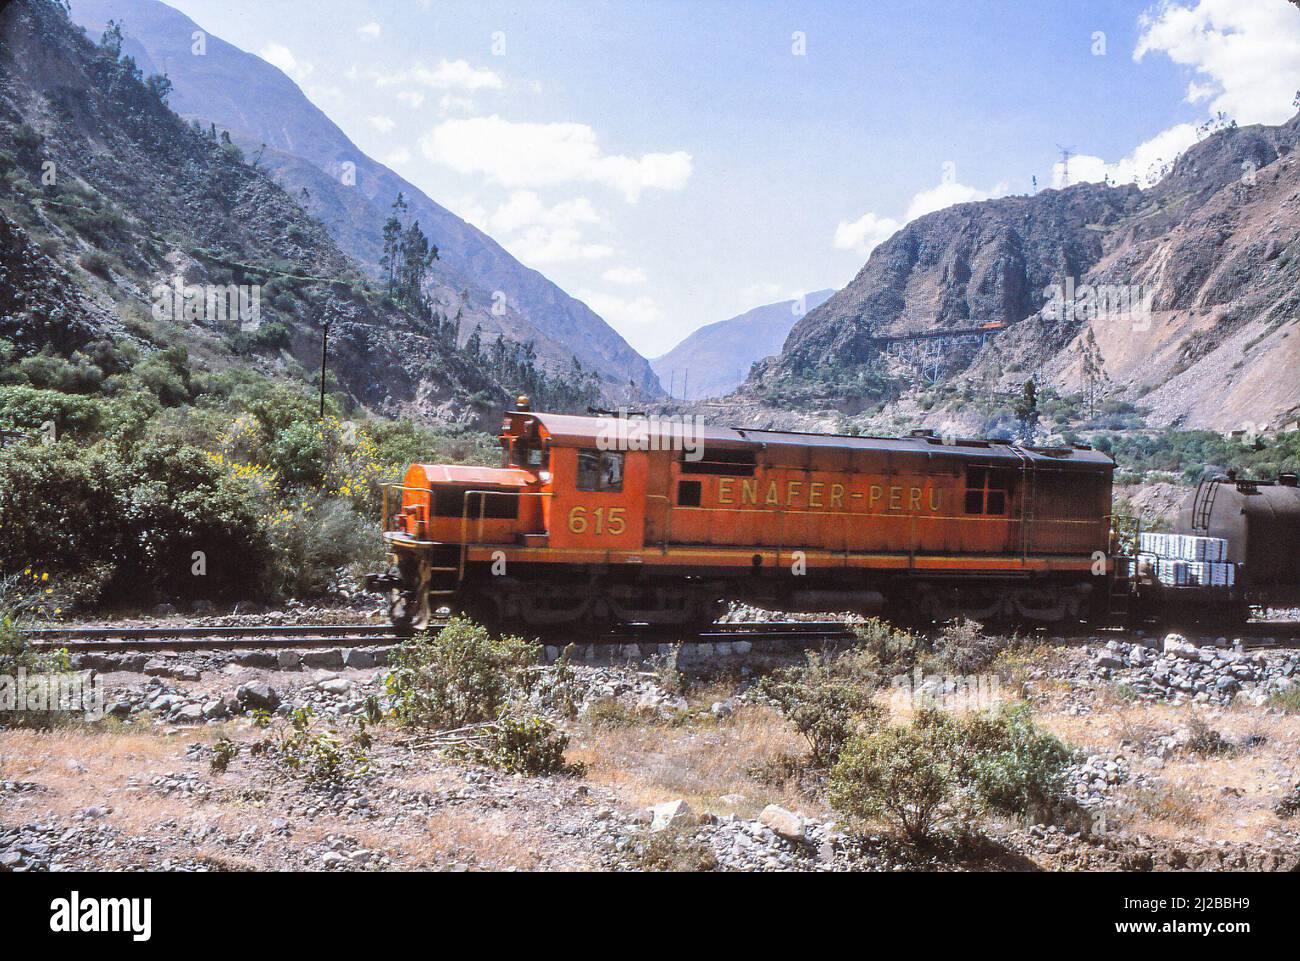 Enafer-Peru locomotive in the Peruvian Andes, May 1980 Stock Photo